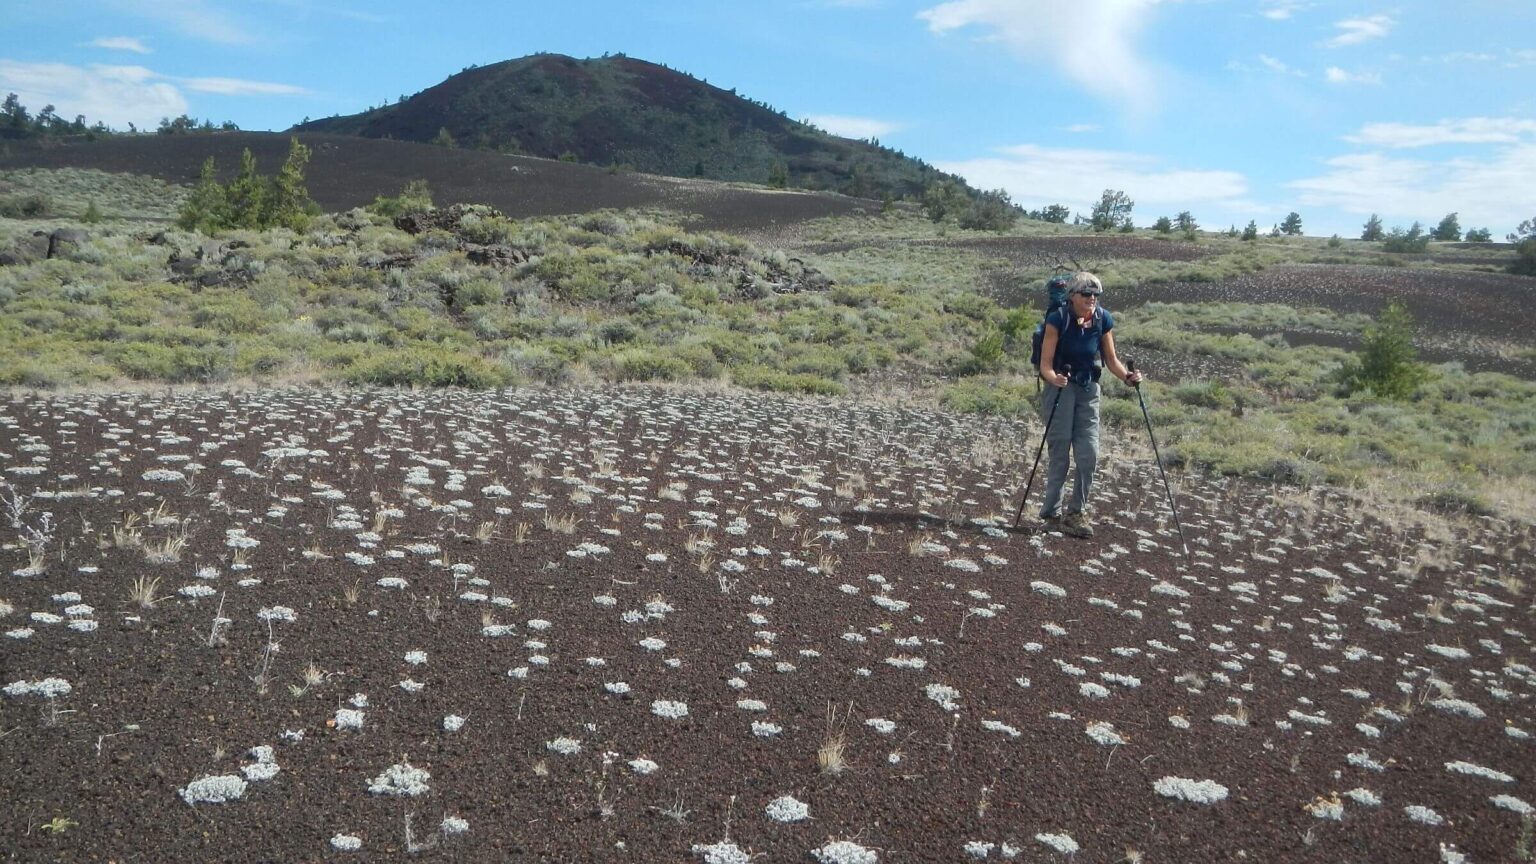 Craters of the Moon National Wilderness, x-country thru cinders, July